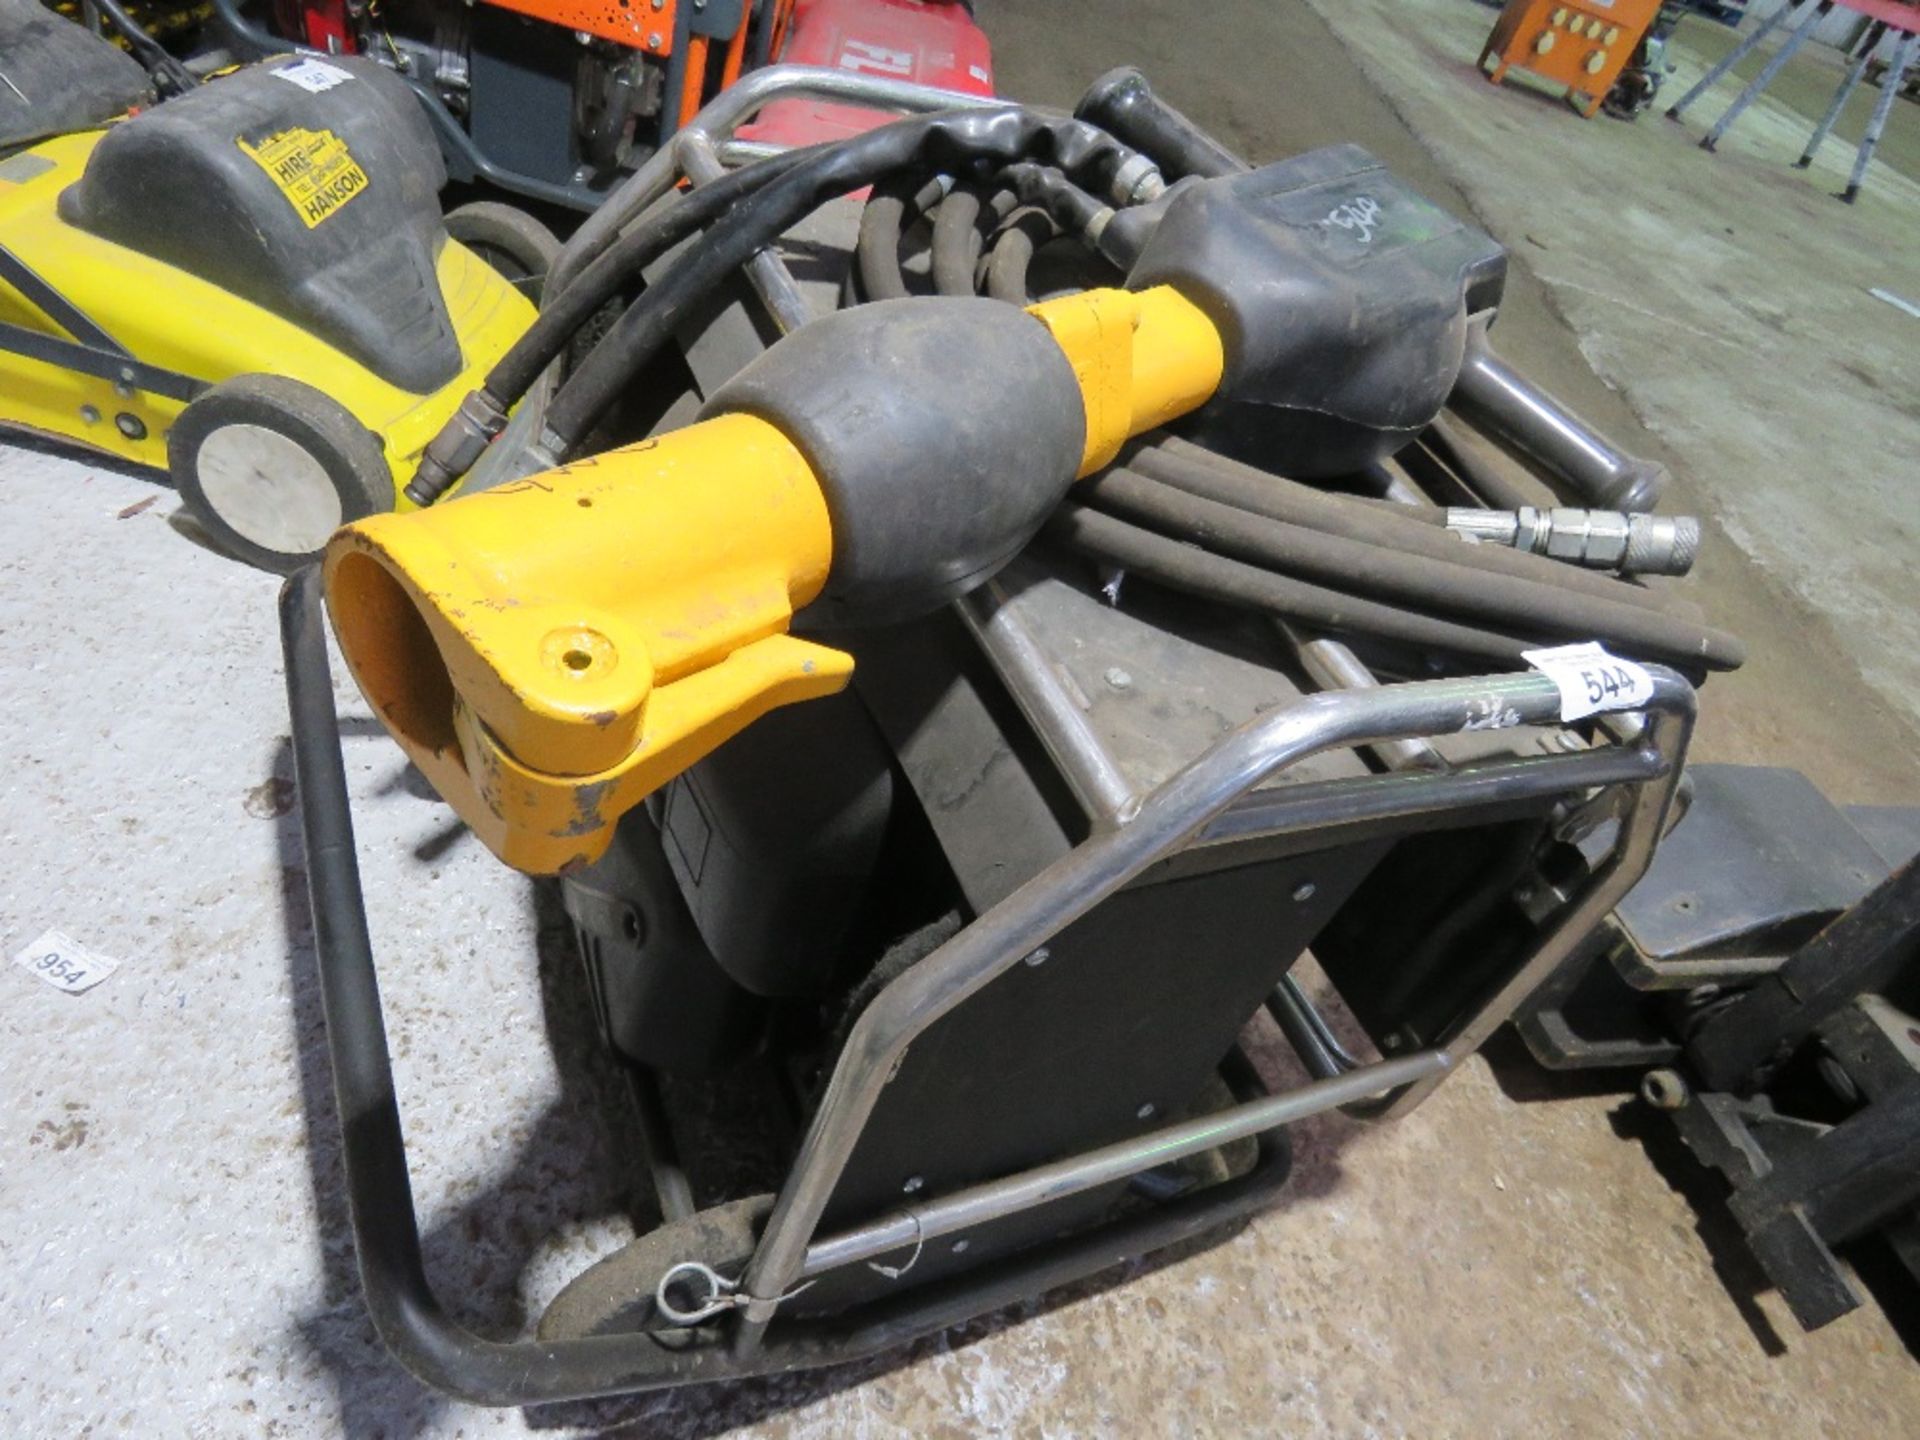 JCB BEAVER HEAVY DUTY DIESEL ENGINED HYDRAULIC BREAKER PACK WITH HOSE AND GUN. WHNE TESTED WAS SEEN